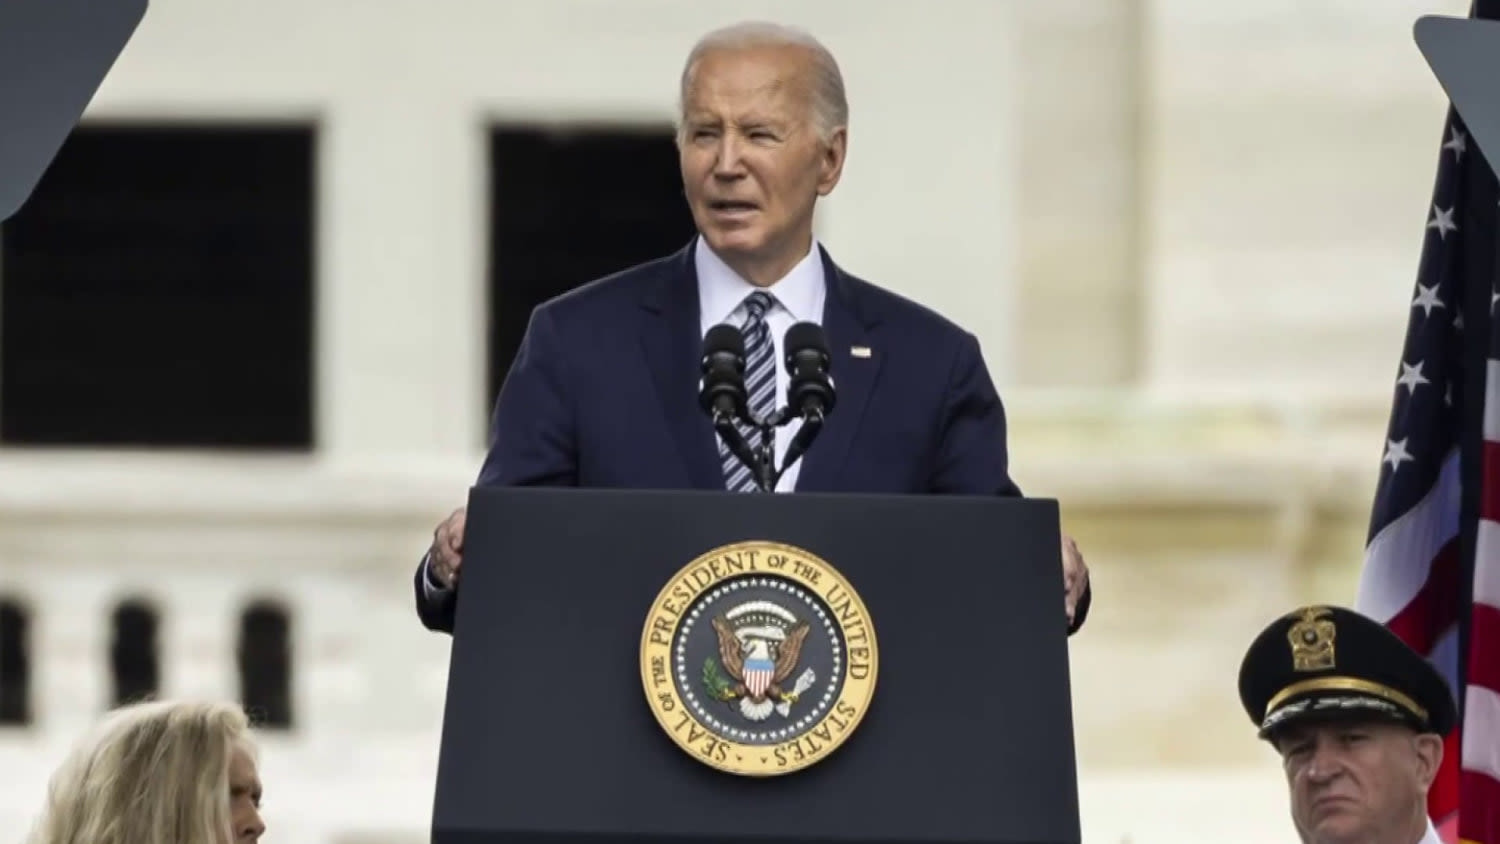 'The stakes are so high': President Biden’s post-debate pressures grow